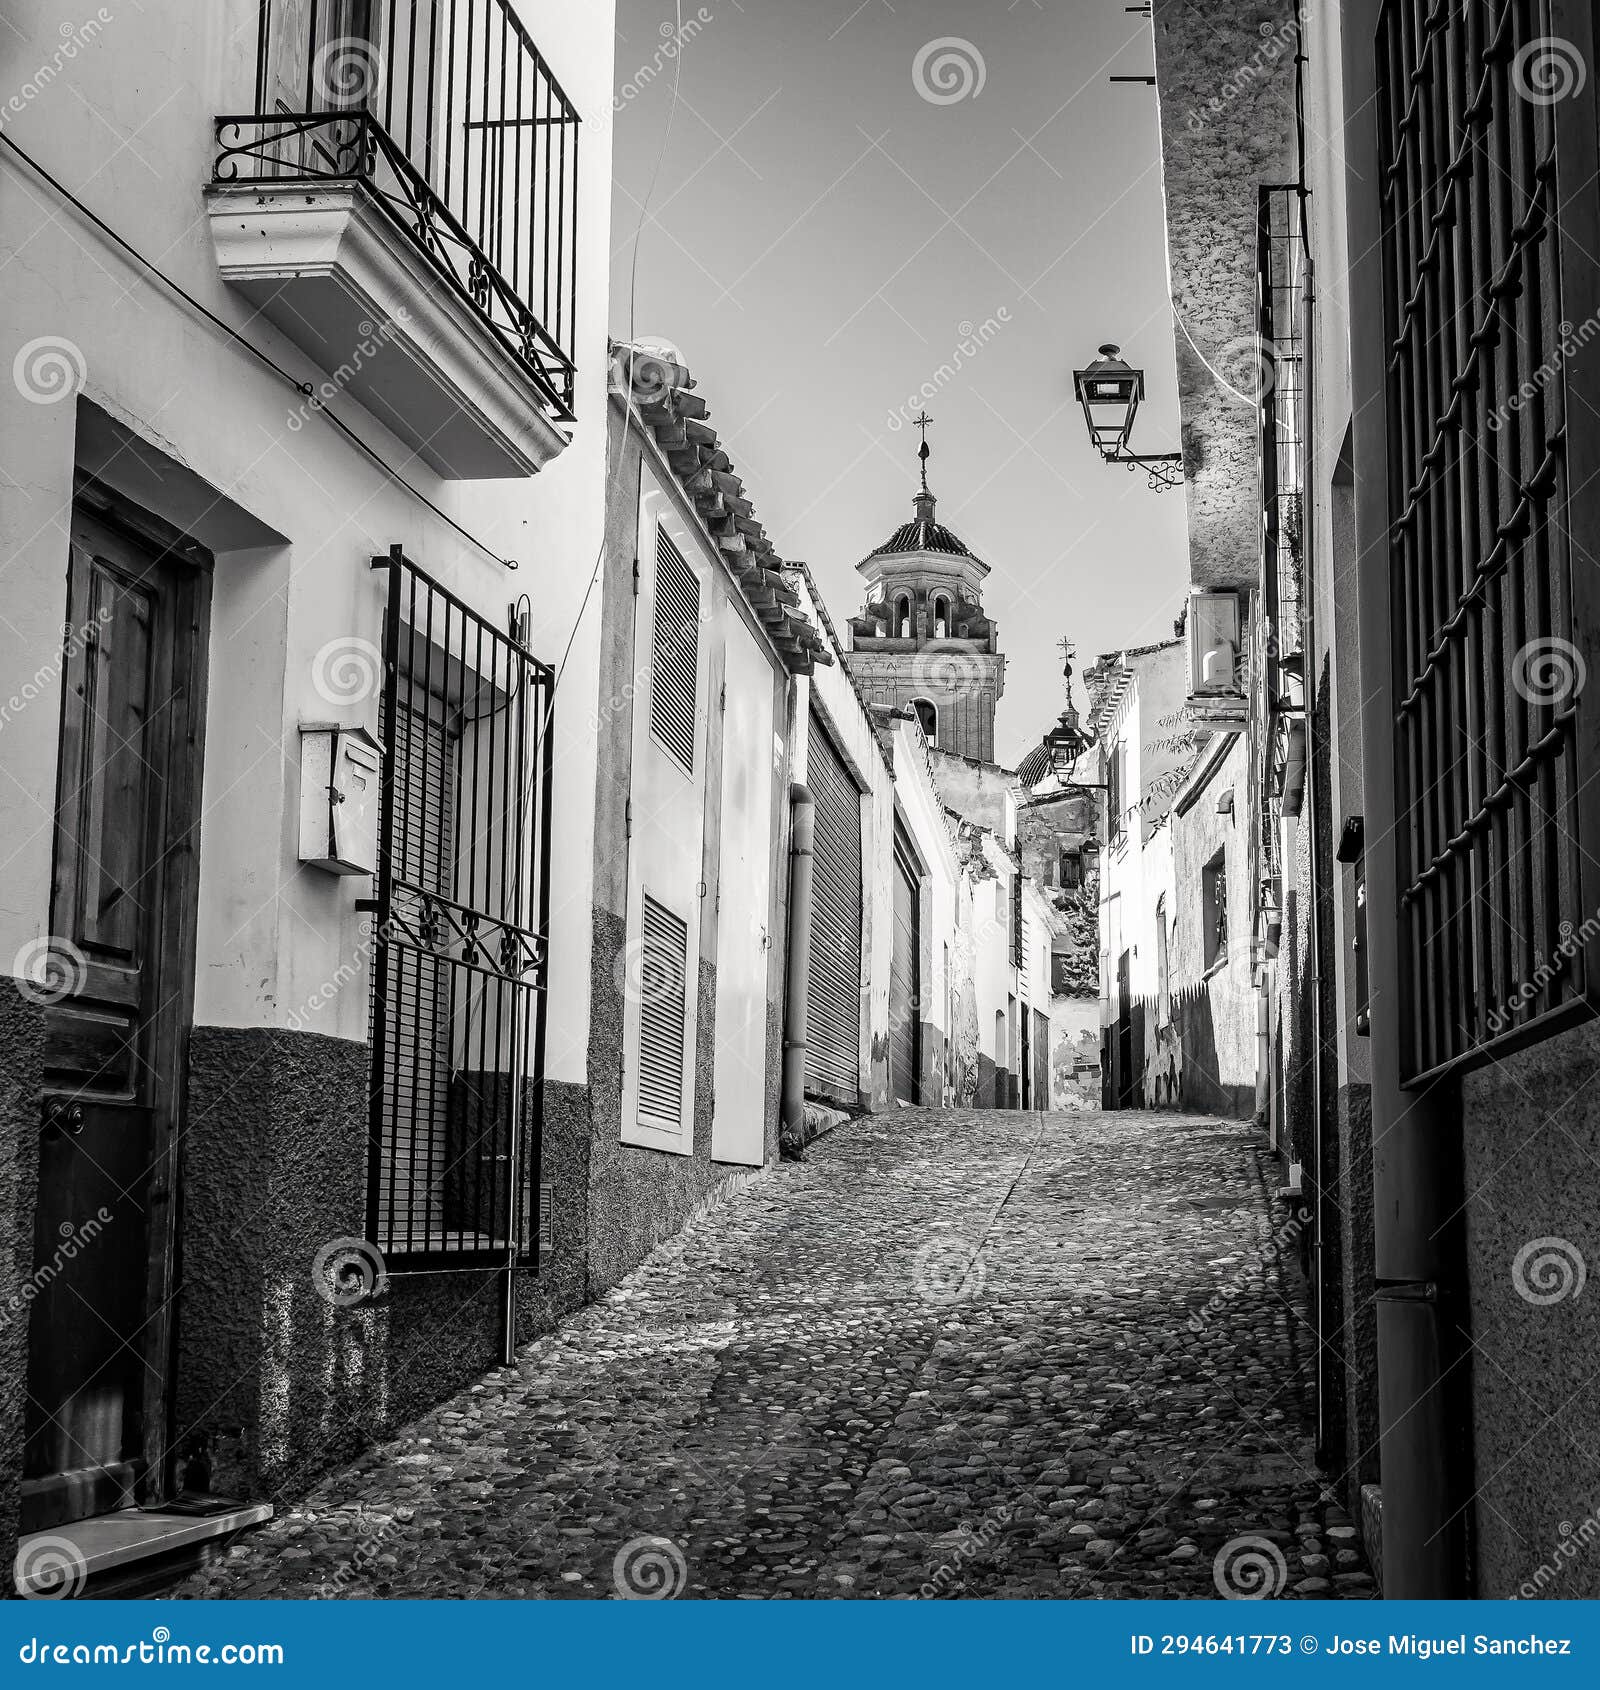 picturesque white village at dusk in andalusia, velez rubio, black and white photo.